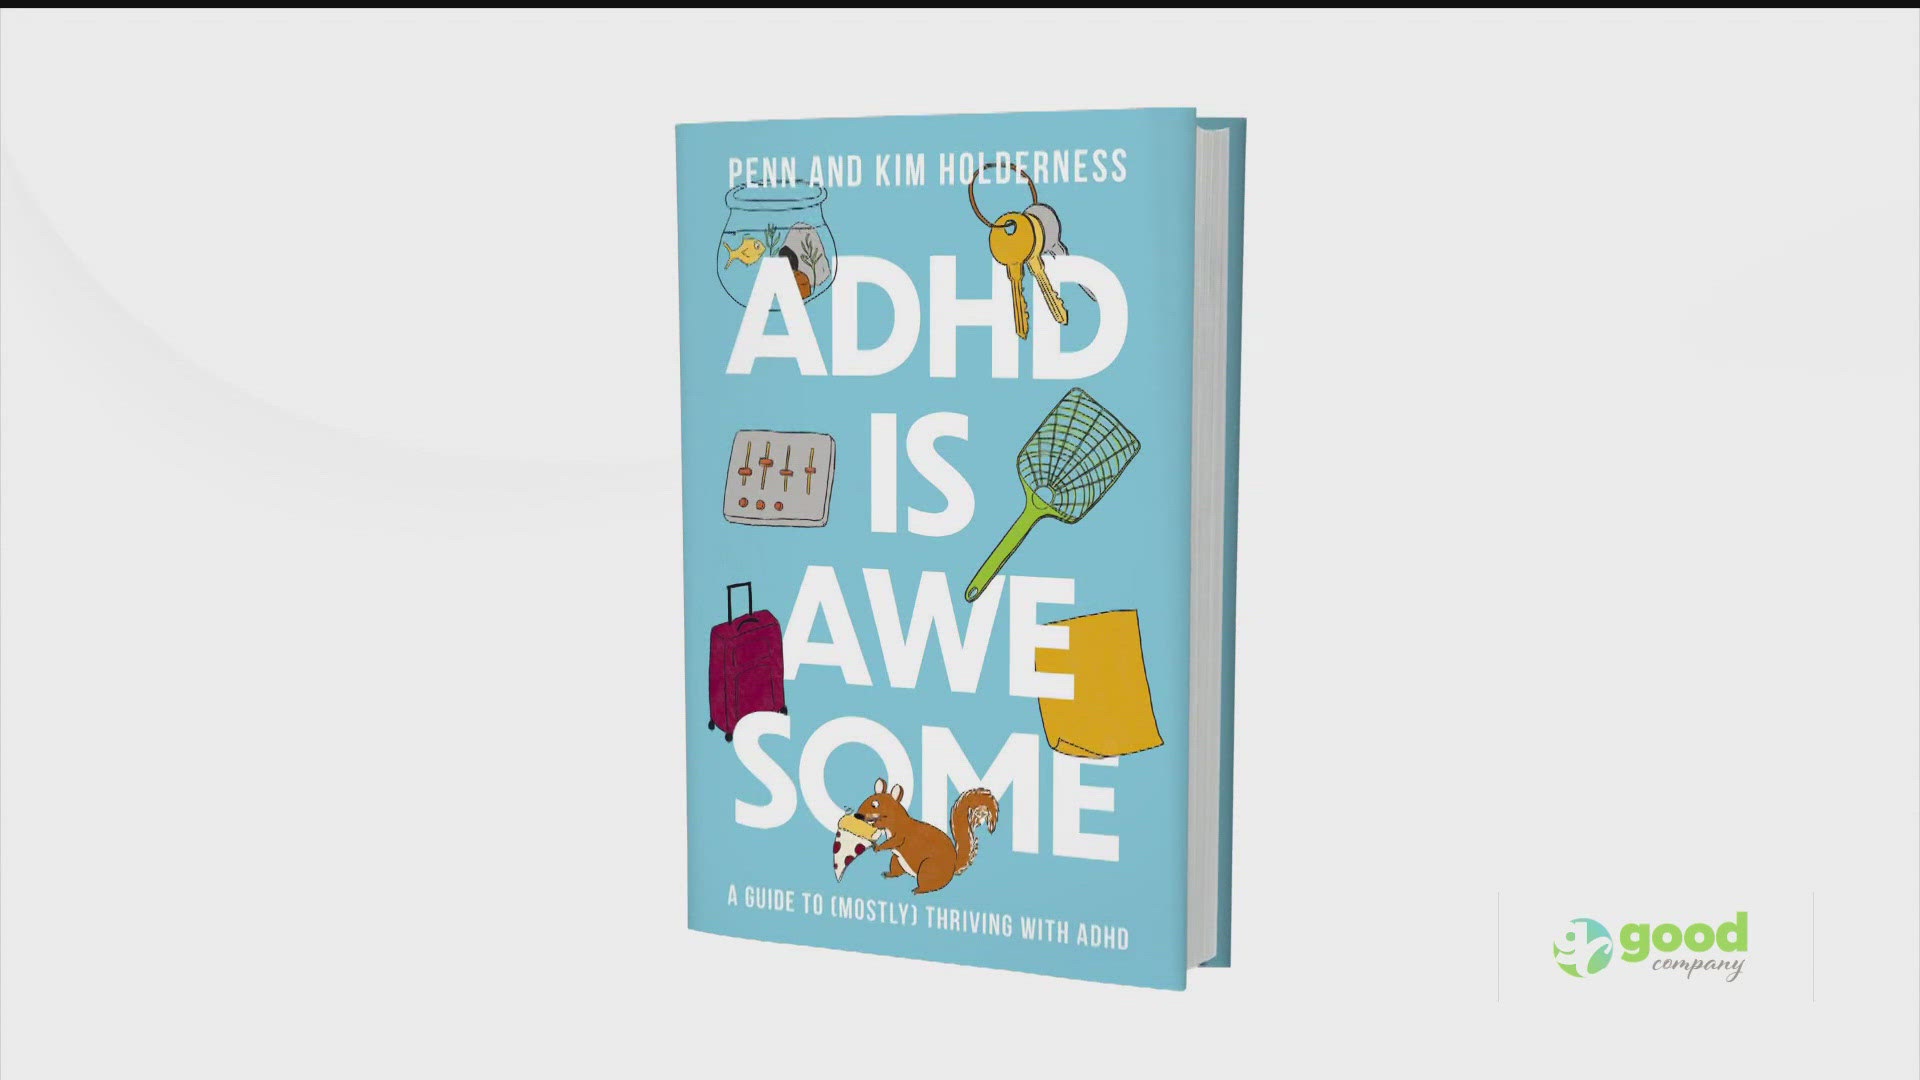 Katherine talks with Penn and Kim Holderness about their new book that highlights the good parts of ADHD.